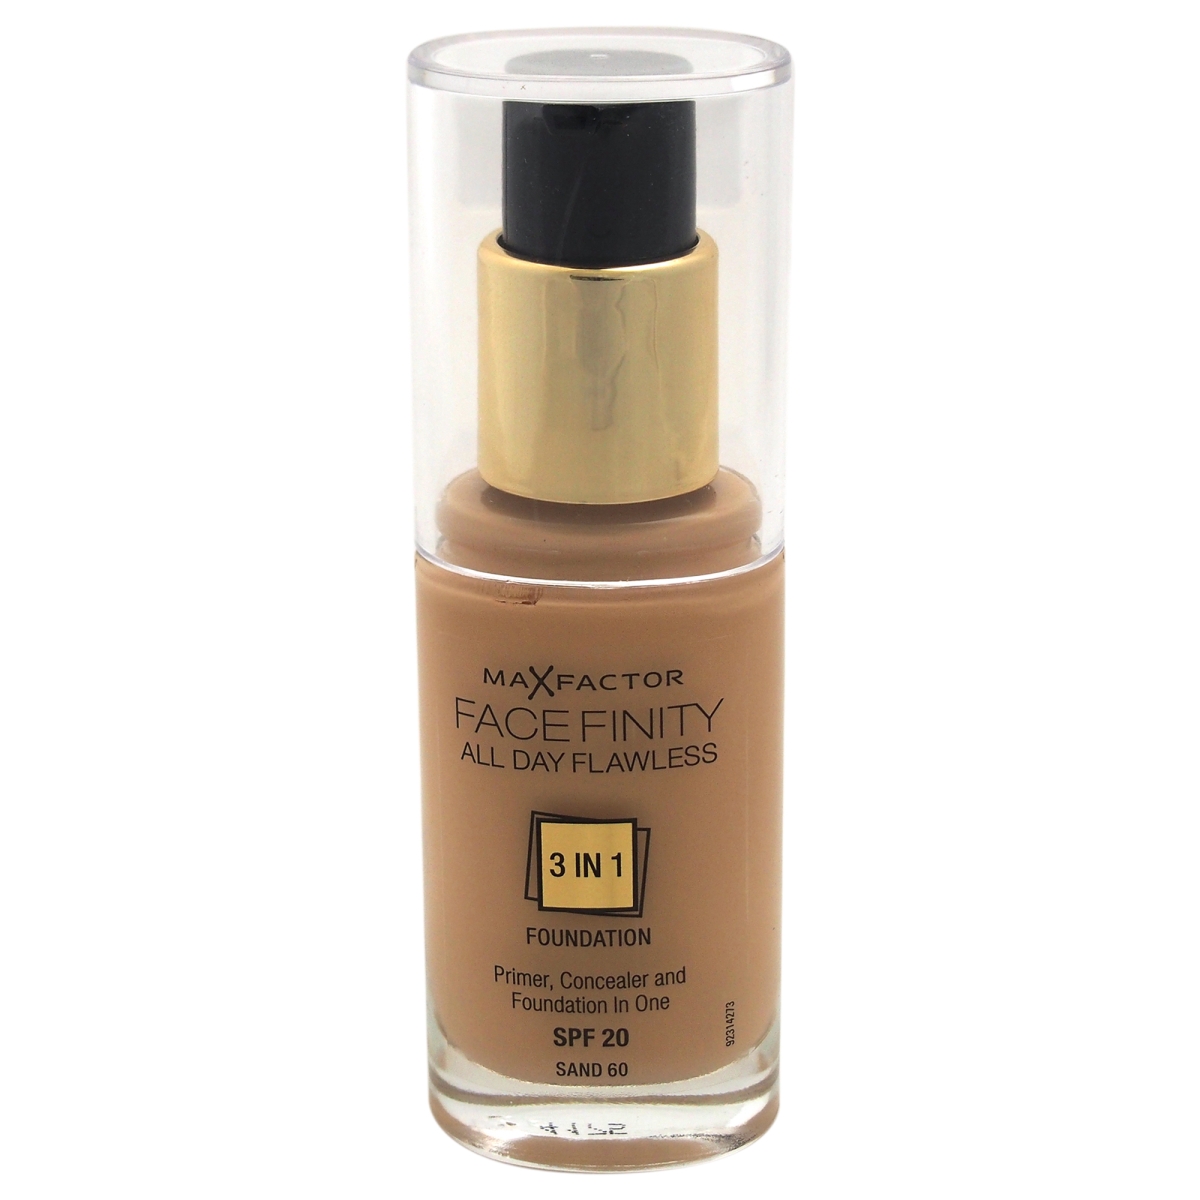 W-c-4569 30 Ml No. 60 Spf20 Facefinity All Day Flawless 3-in-1 Foundation - Sand For Women